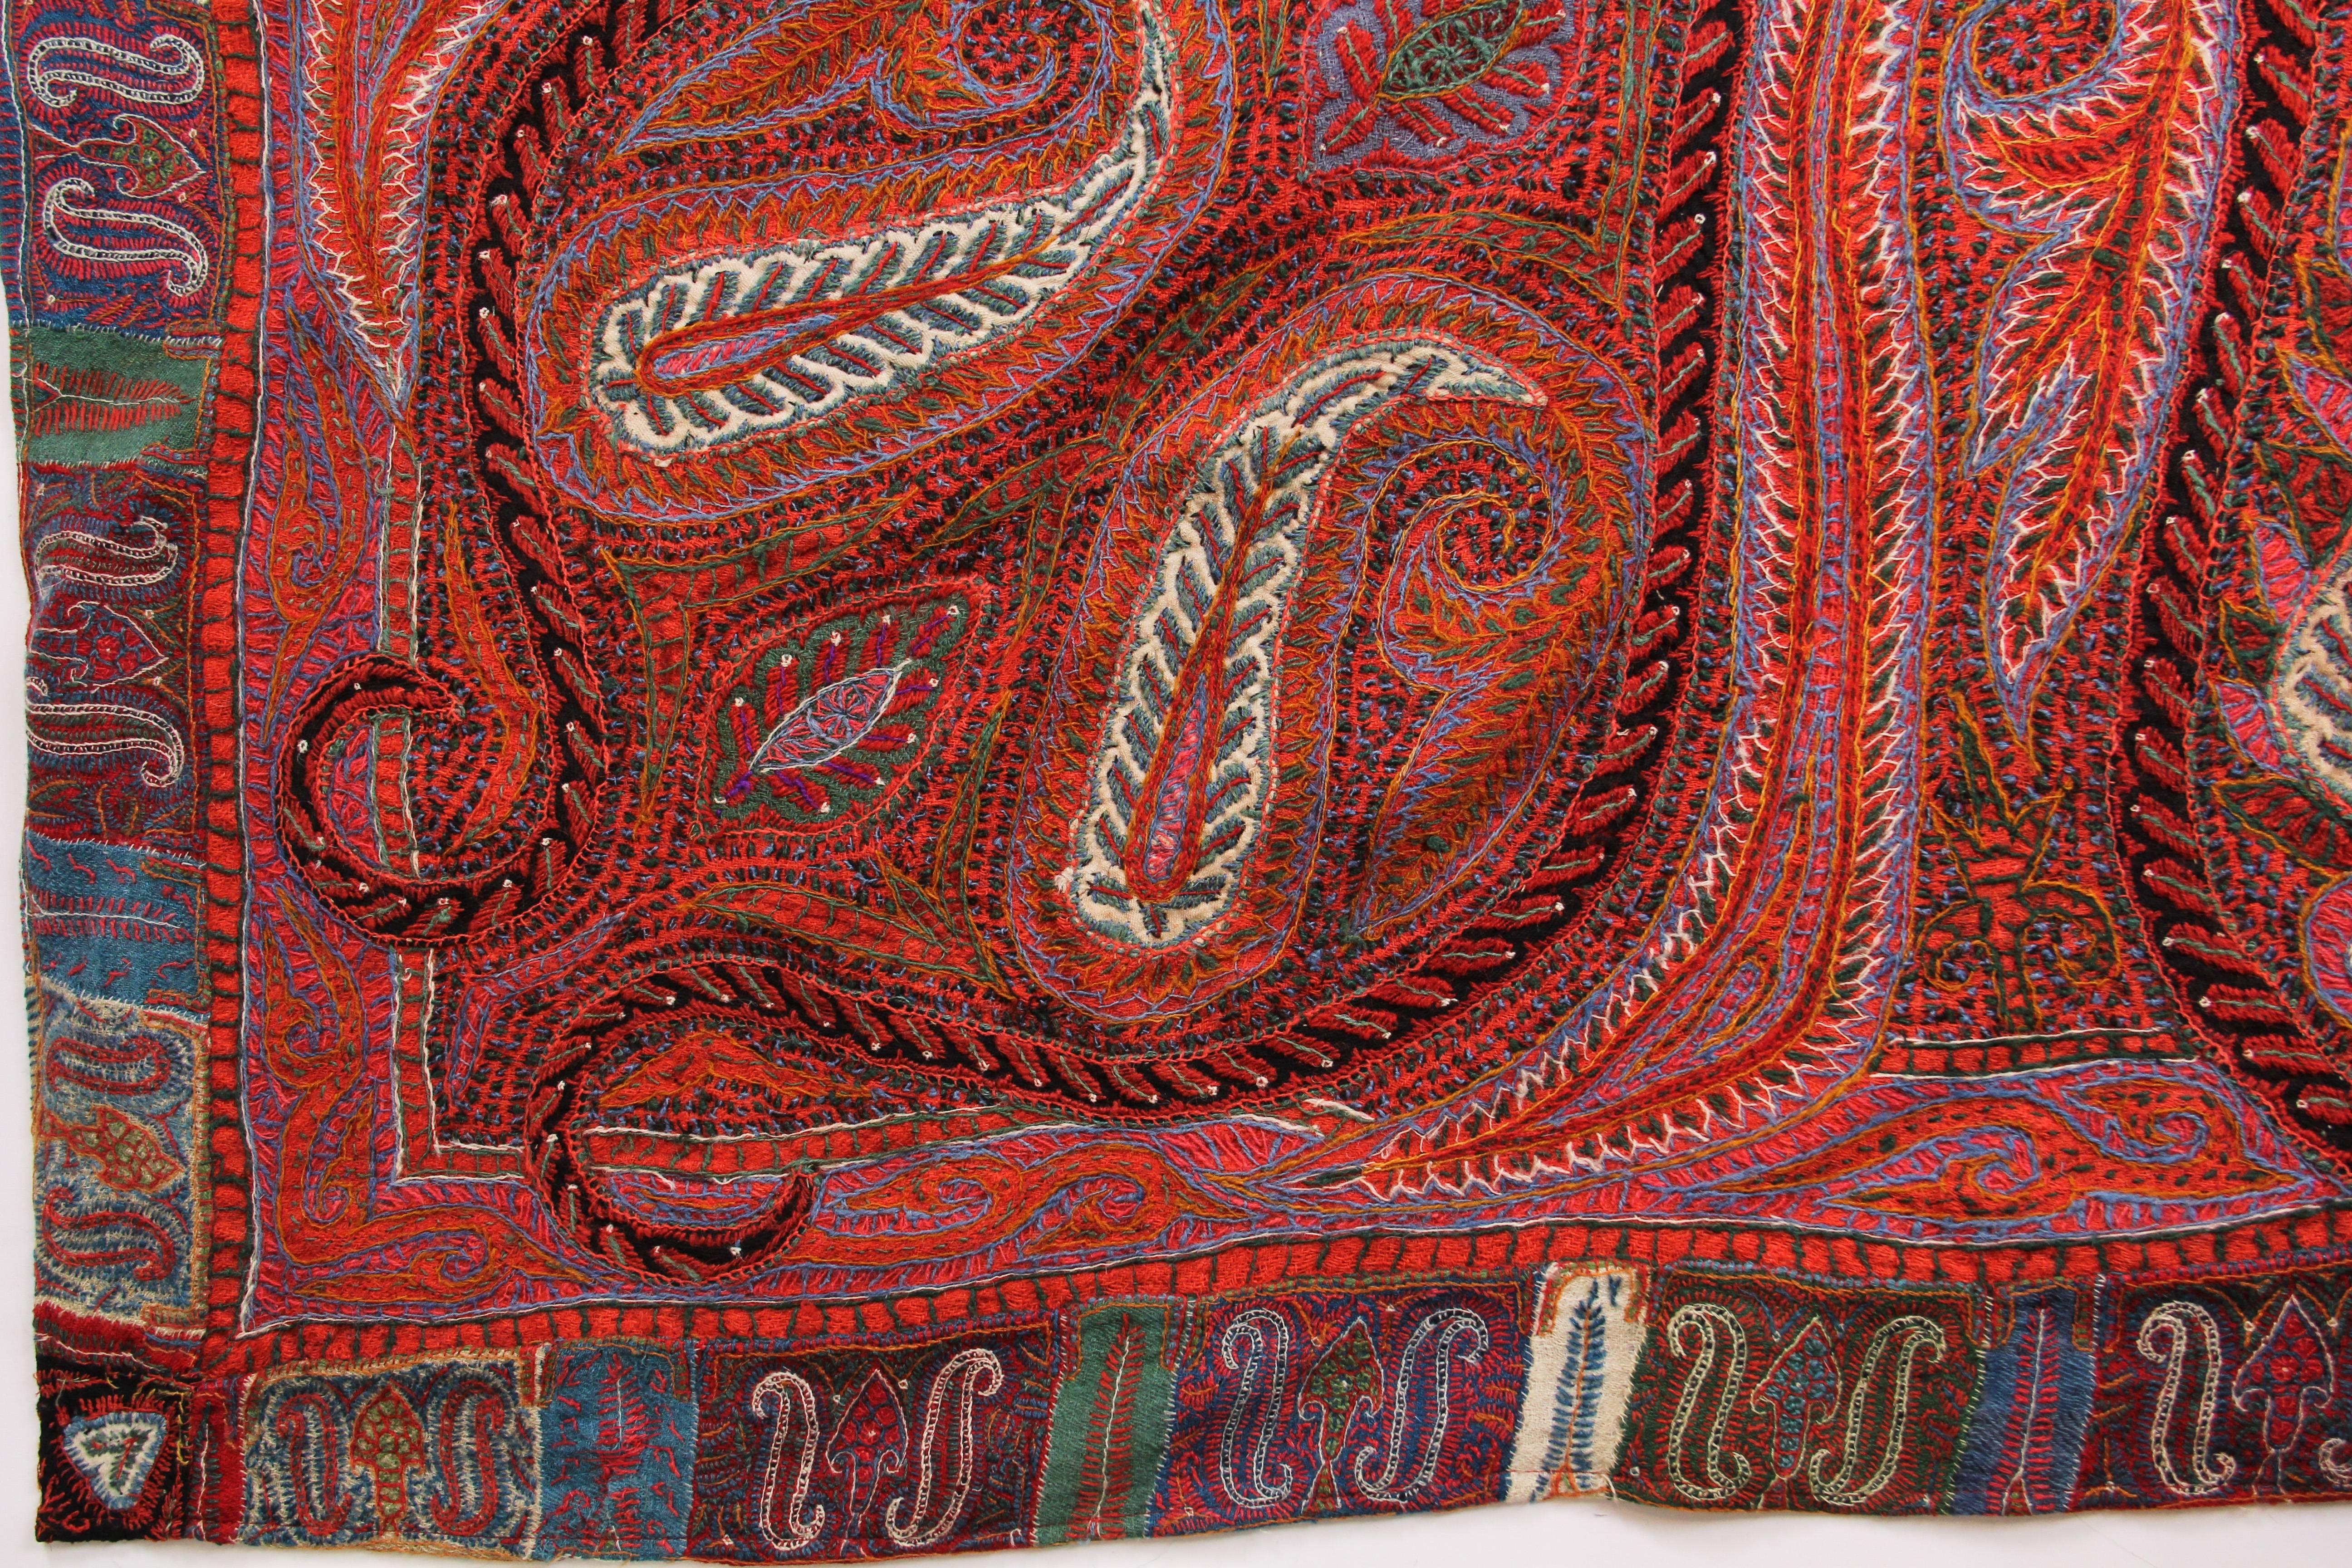 Brown Antique Indian Embroidered Paisley Shawl blanket